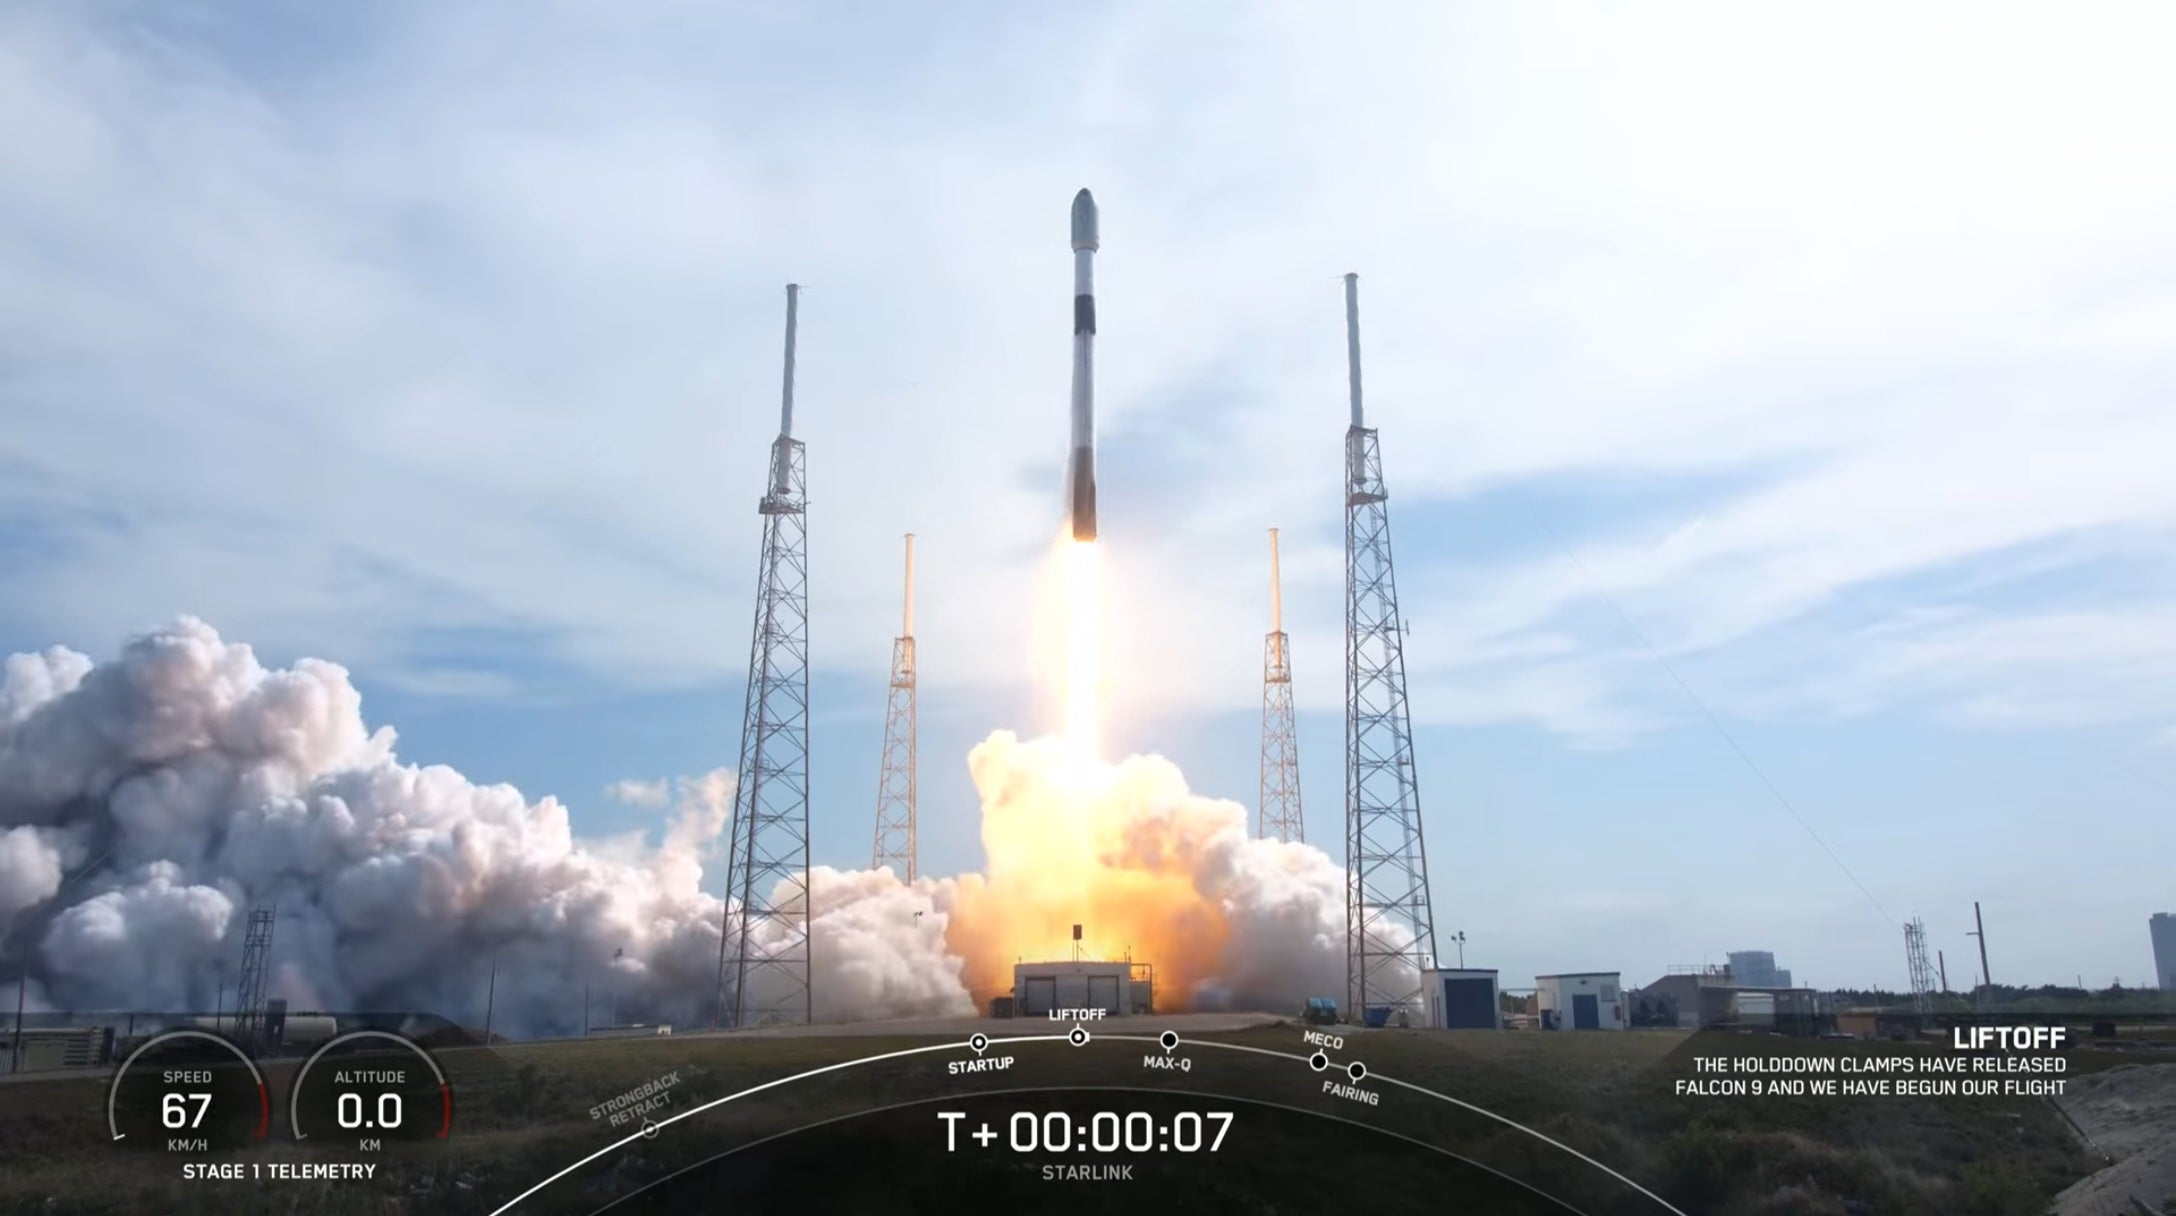 SpaceX launches another batch of 56 Starlink satellites to expand internet coverage